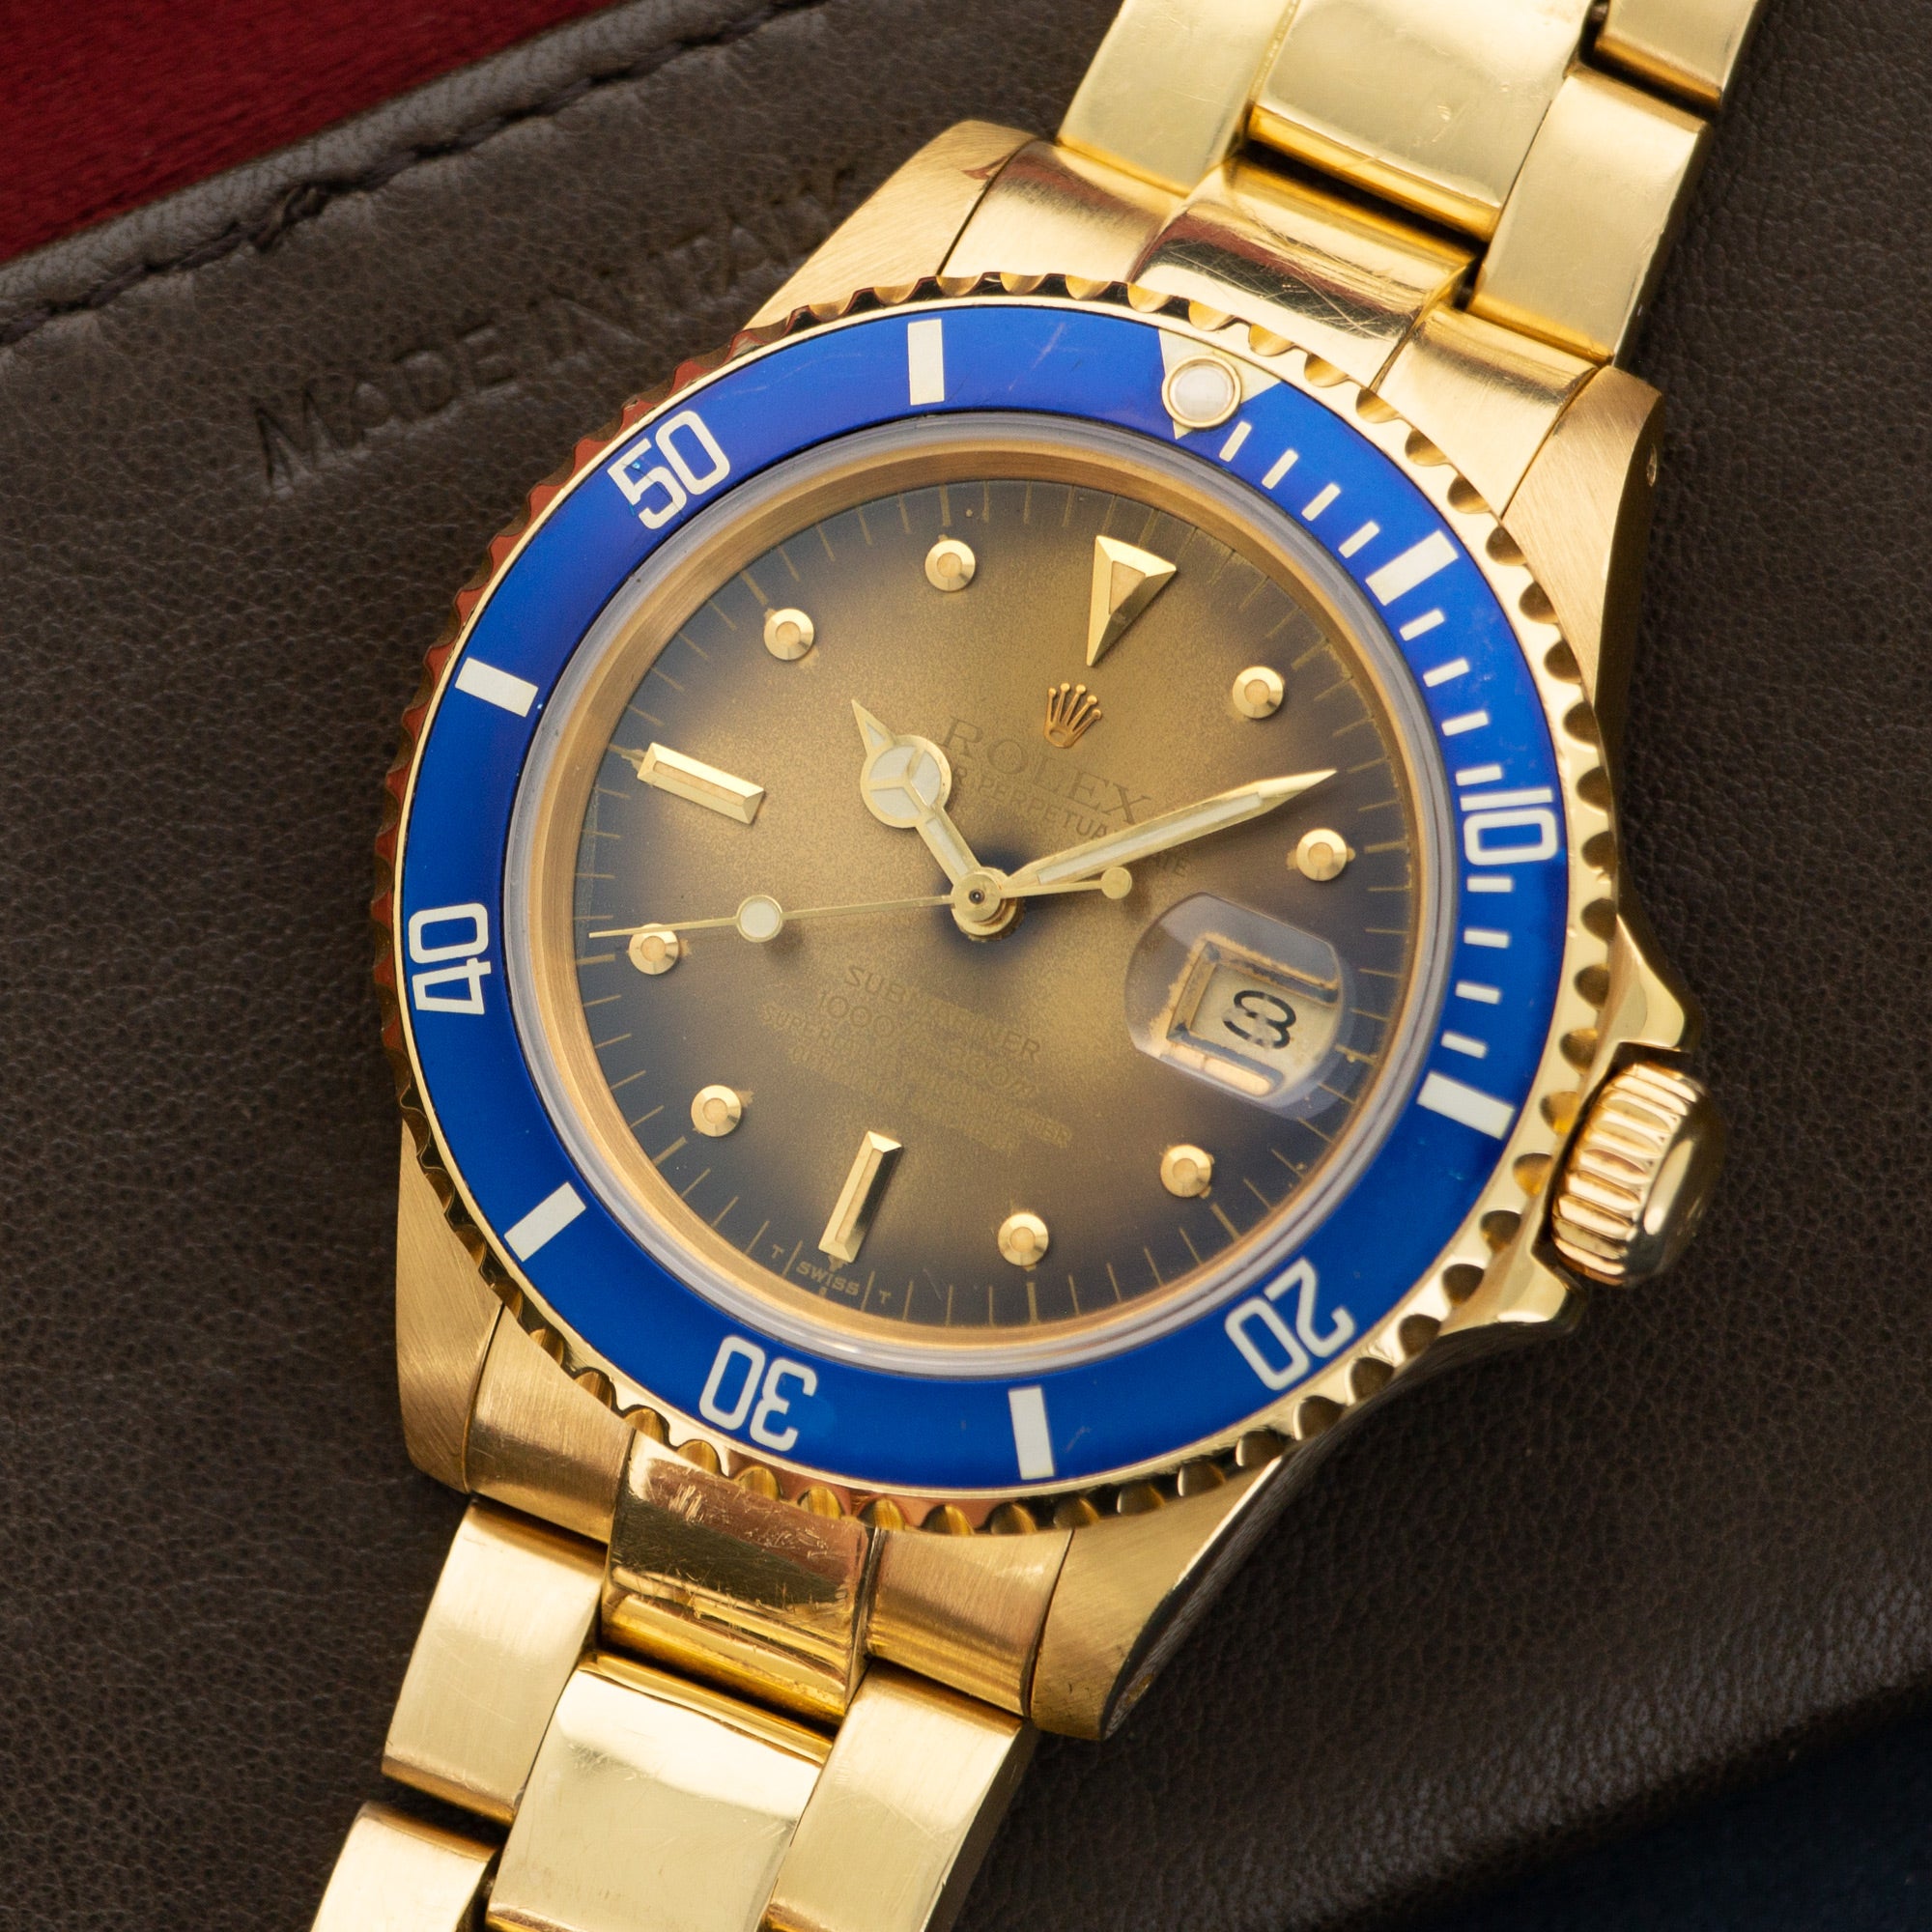 Rolex Submariner Date 18k Yellow Gold Tropical Dial ref 16808